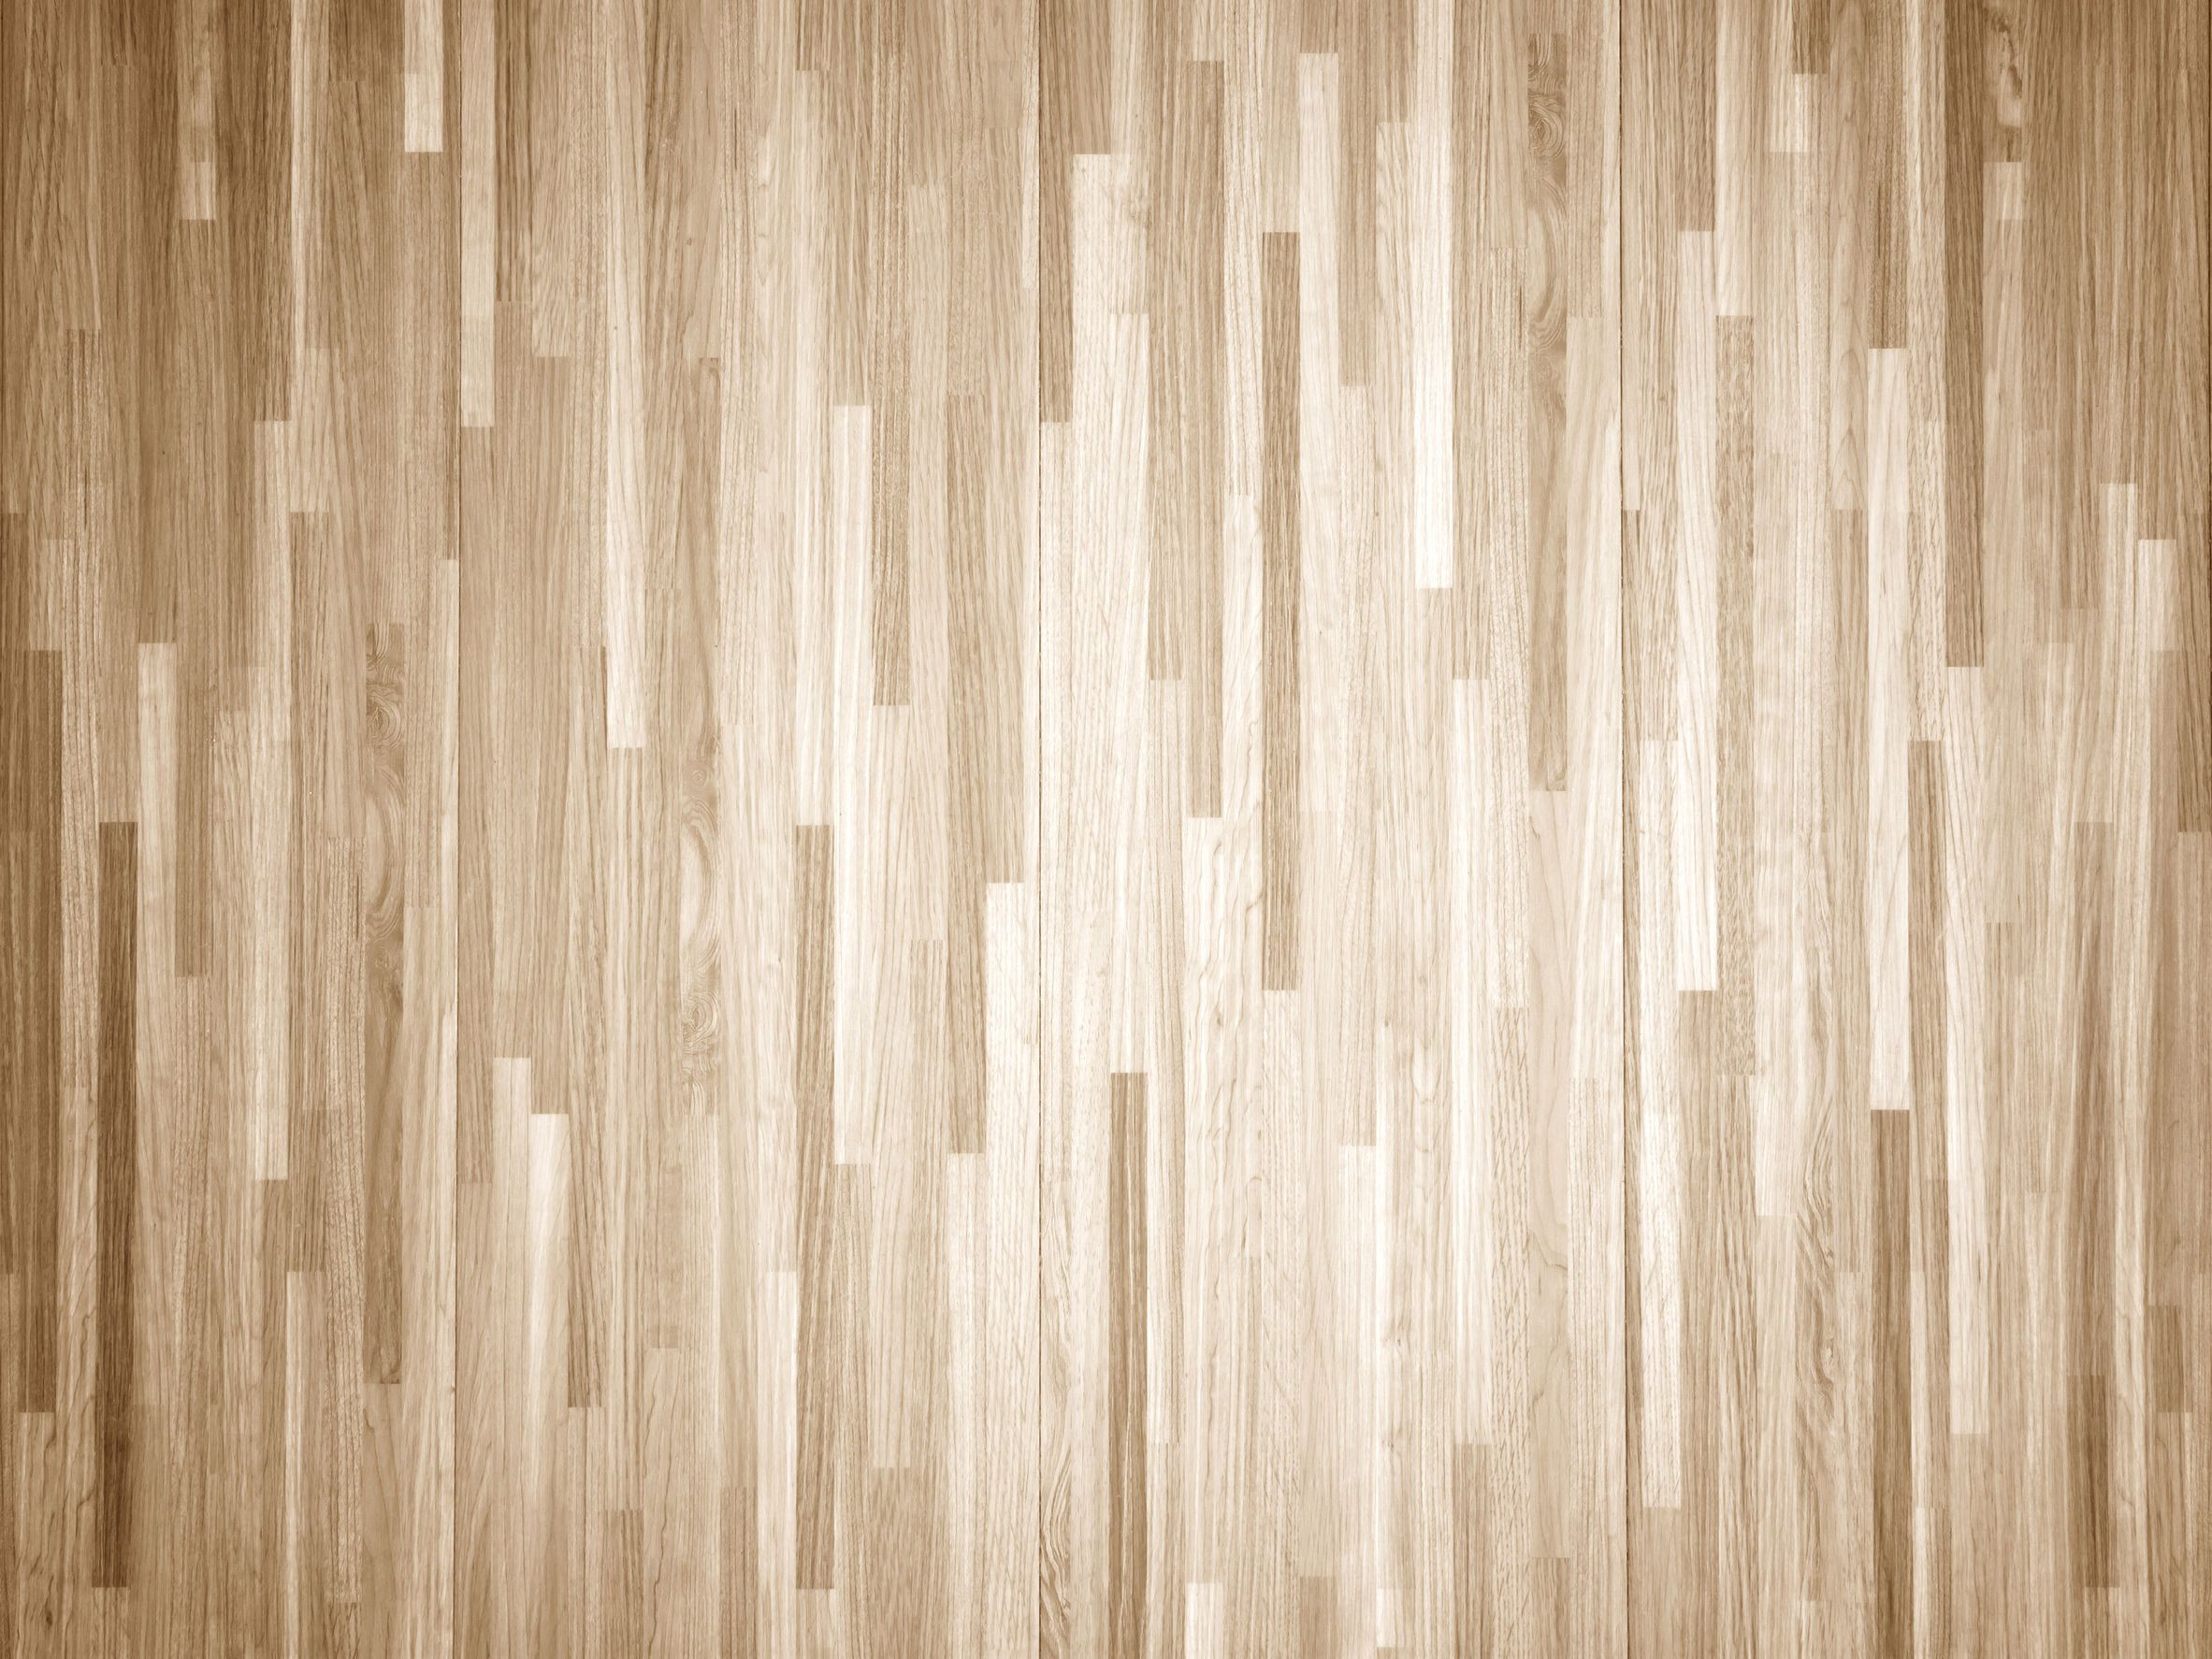 14 Recommended Laminate Hardwood Flooring Cost Per Square Foot 2024 free download laminate hardwood flooring cost per square foot of how to chemically strip wood floors woodfloordoctor com for you